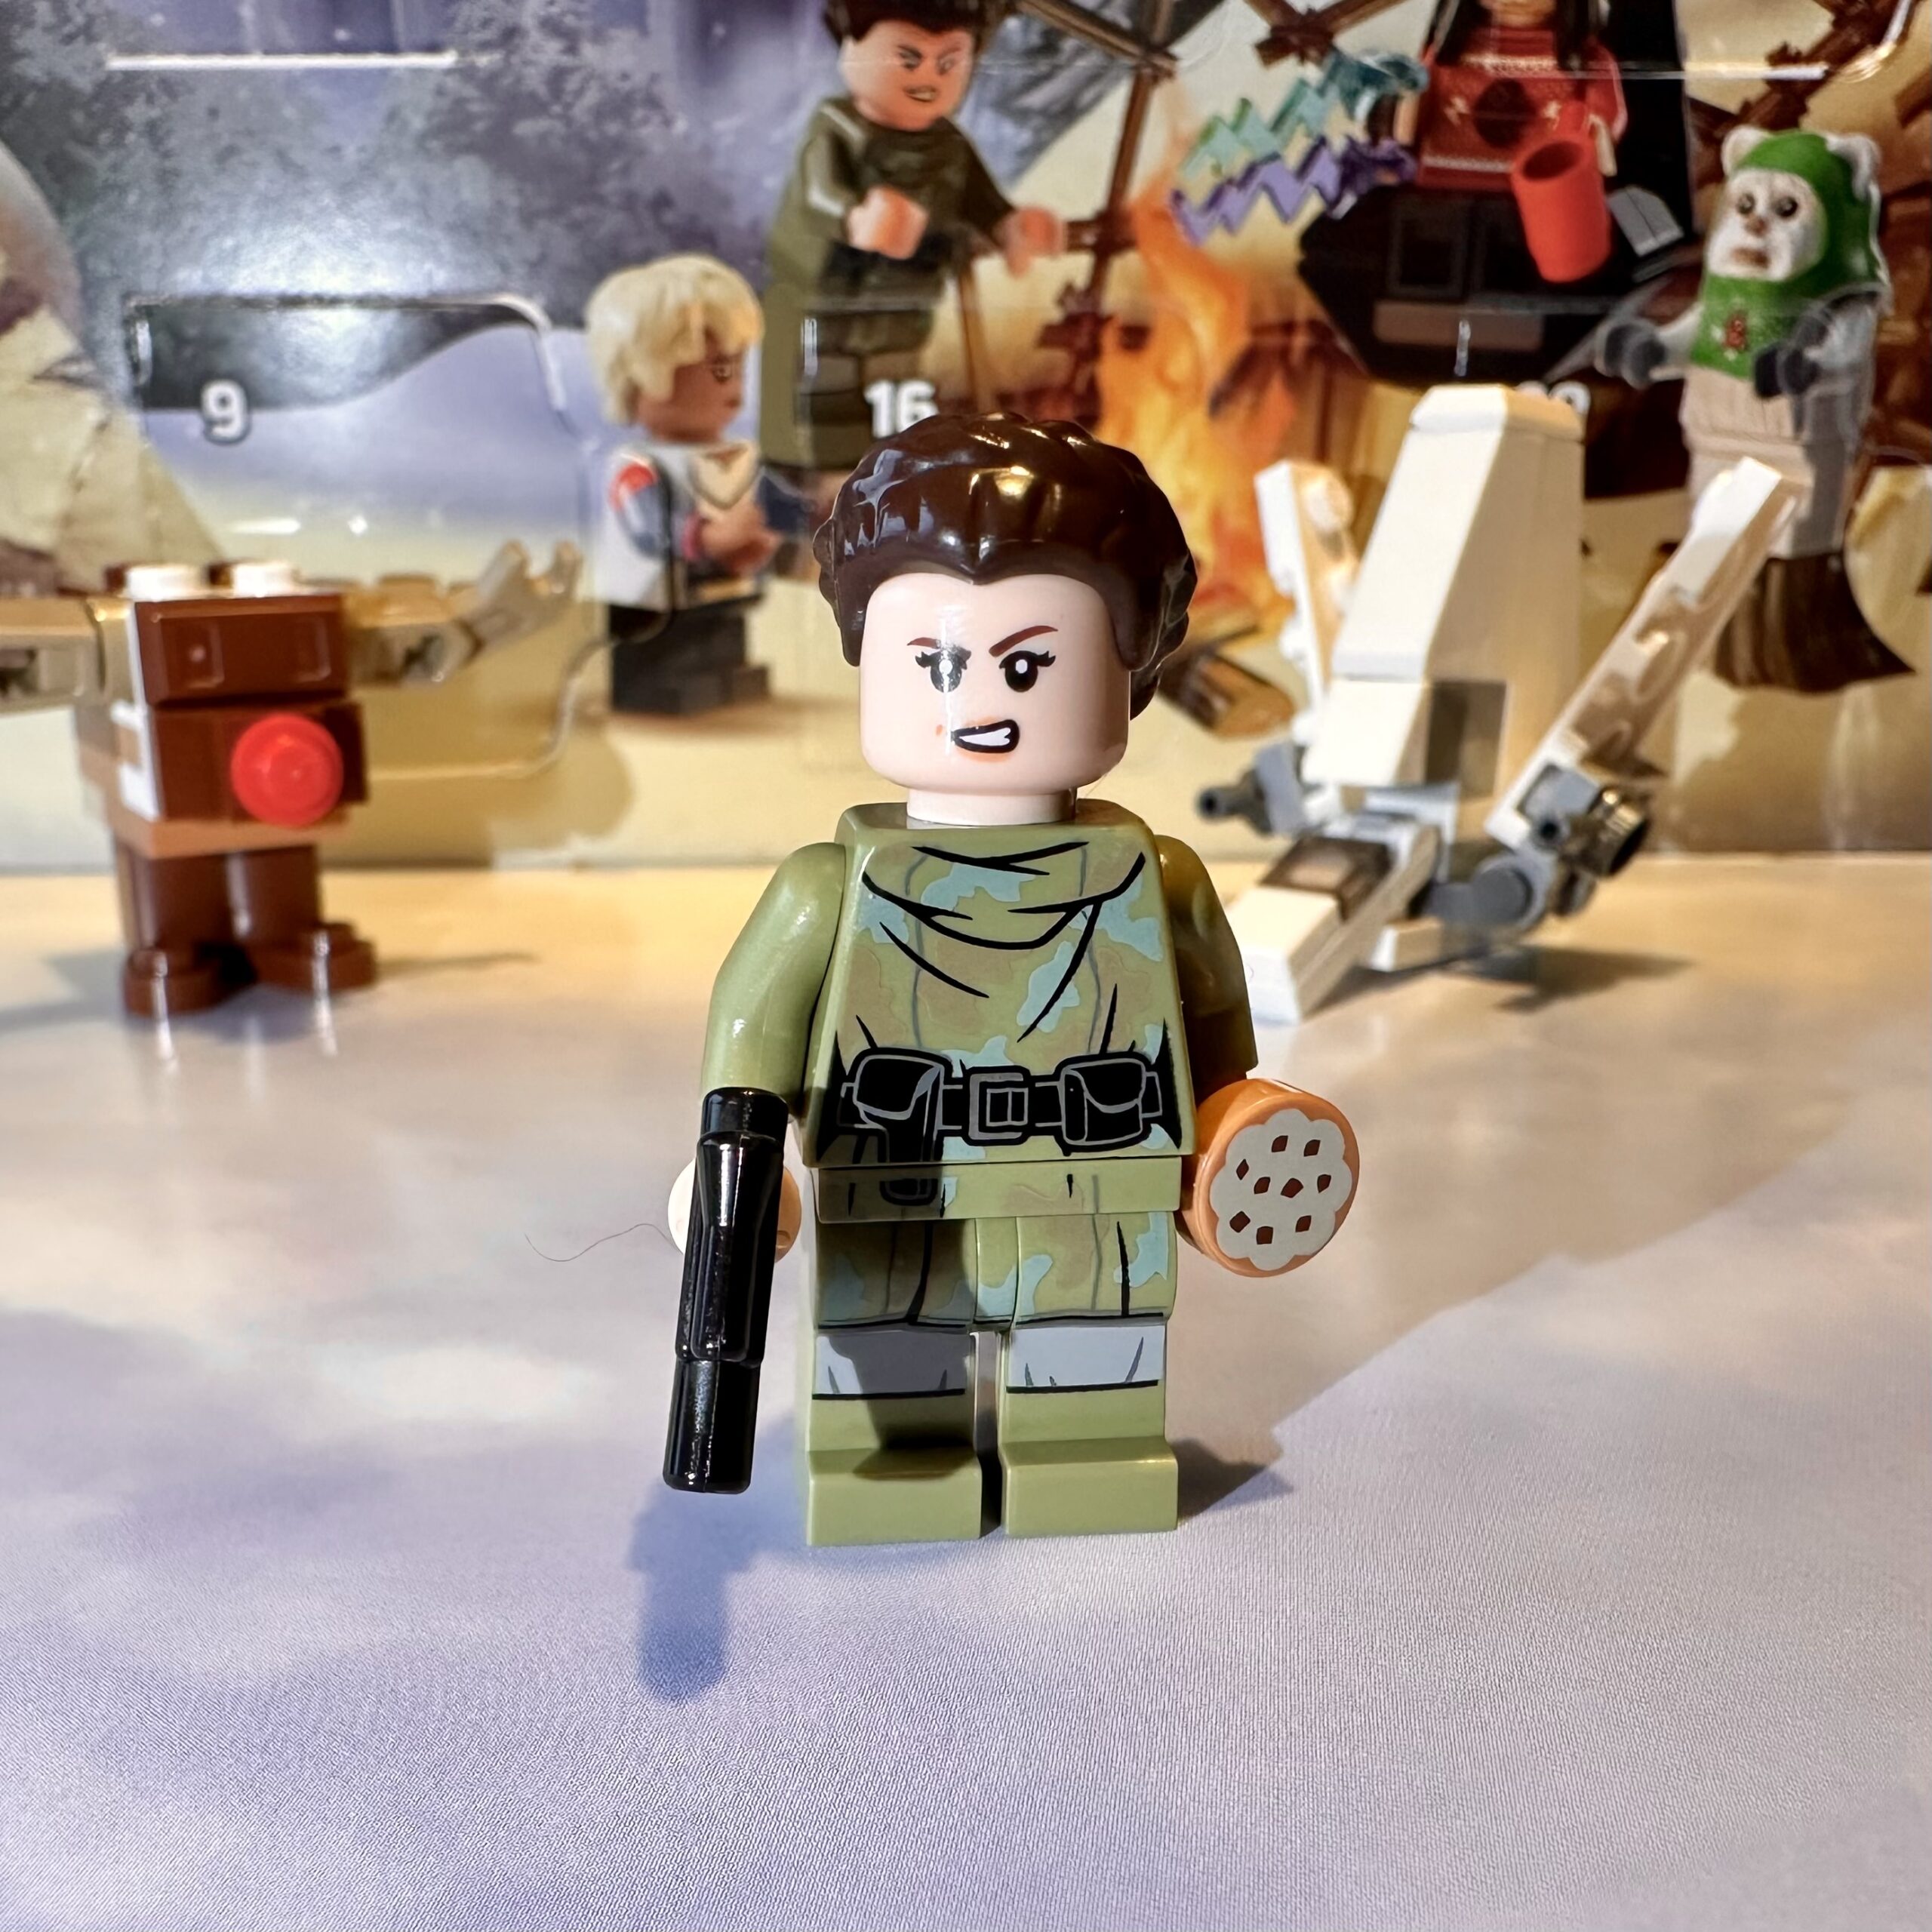 LEGO minifigure of Return of the Jedi era Princess Leia in her Endor moon forest camouflage outfit. She holds a small blaster in her right hand and a cookie in her left.